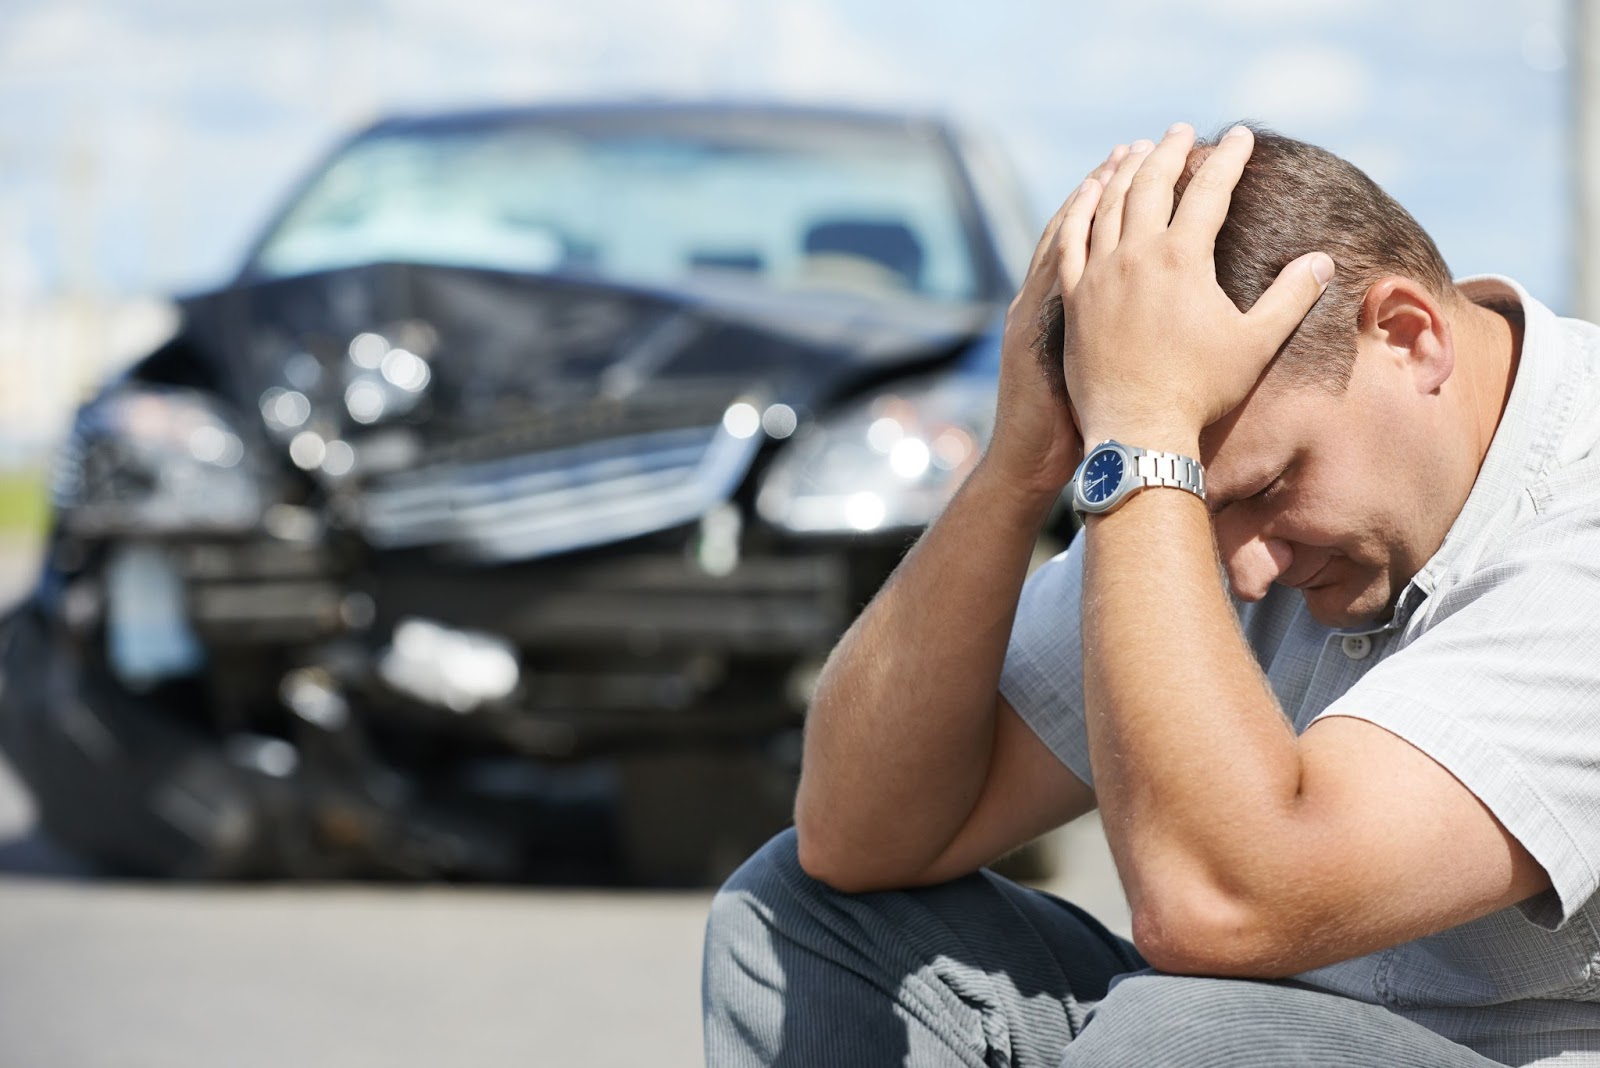 WHAT IS THE COVERAGE OF INSURANCE OF THE DRIVER? ~ Insurance for your